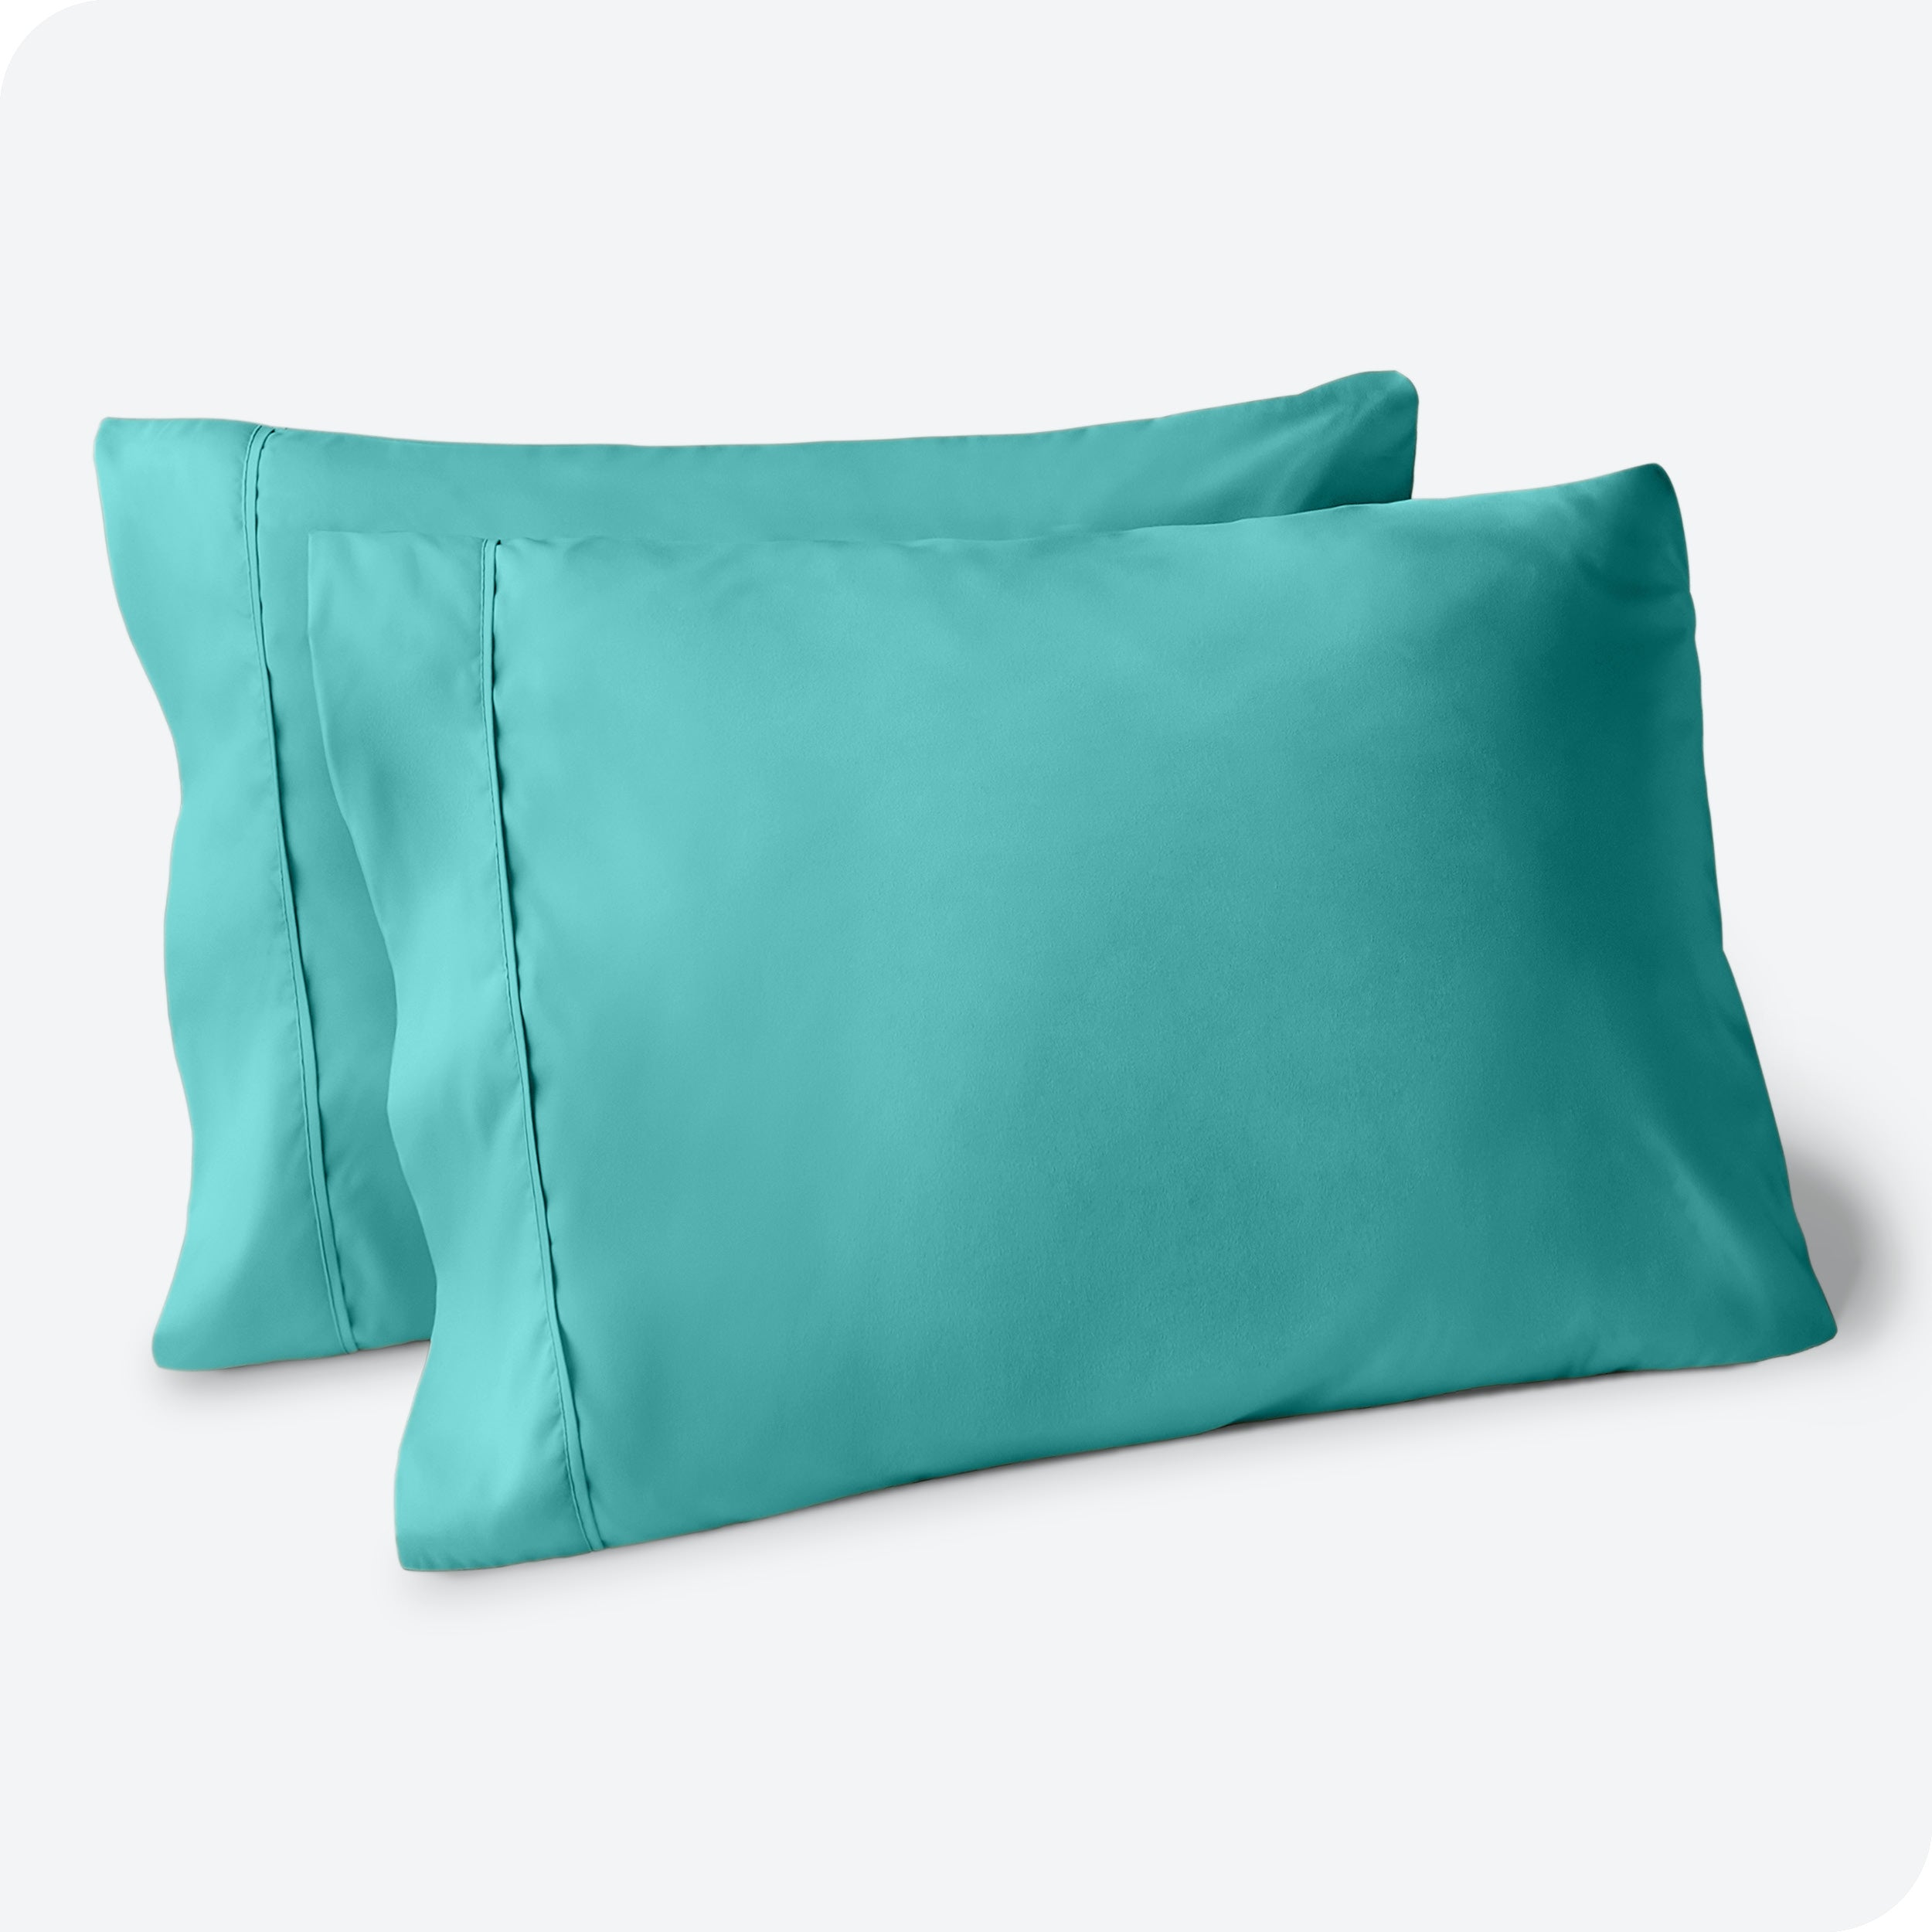 Two pillows on a white background with turquoise pillowcases on them